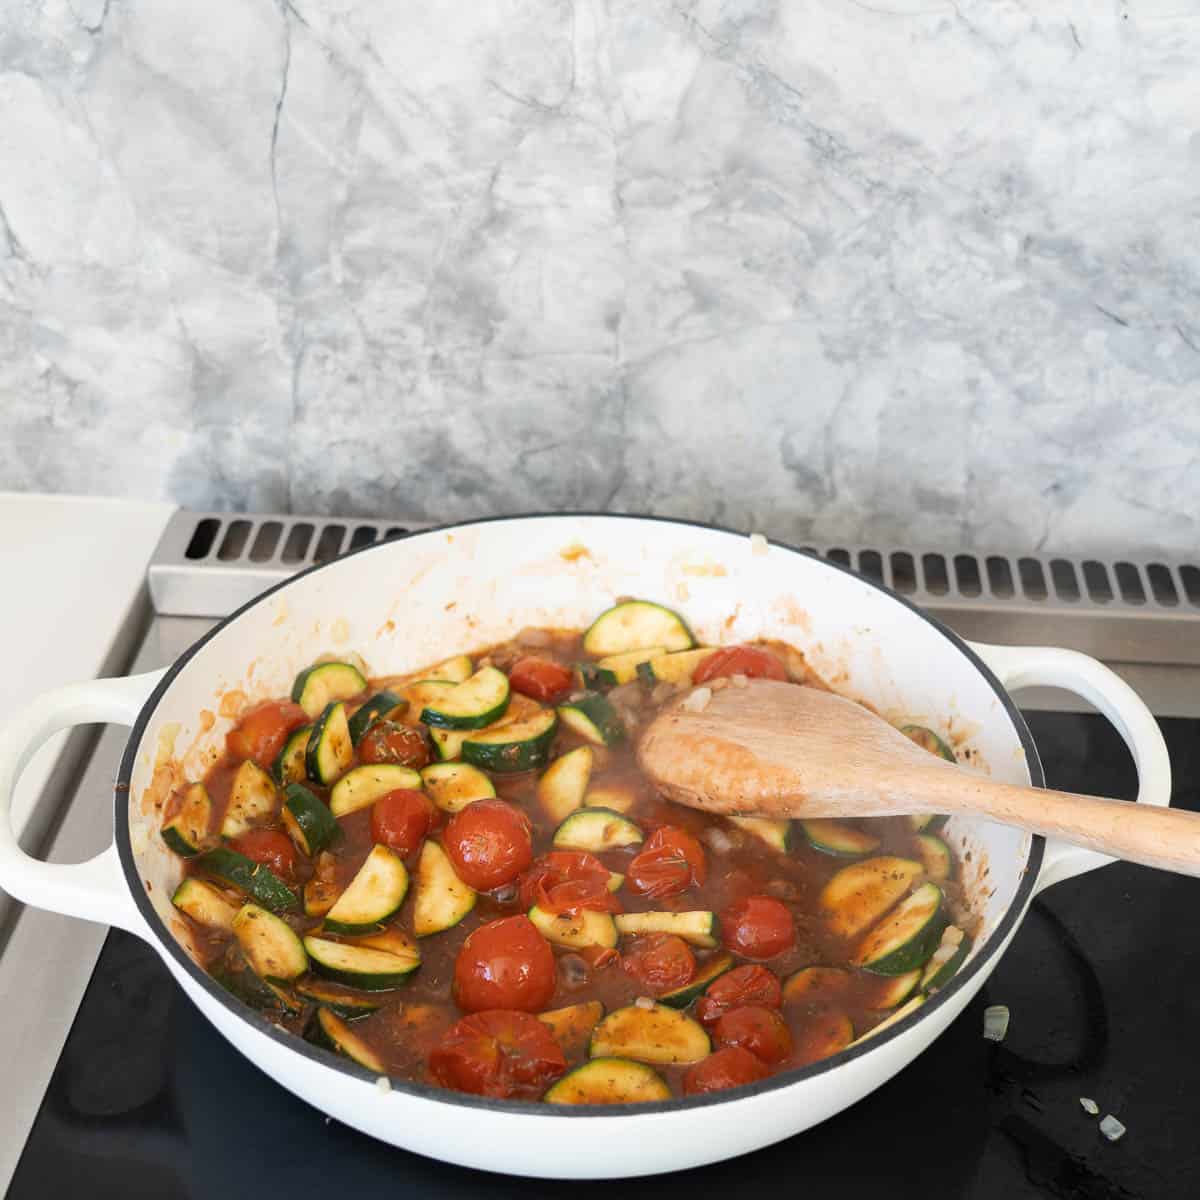 A tomato and vegetable sauce simmering in a white casserole dish.